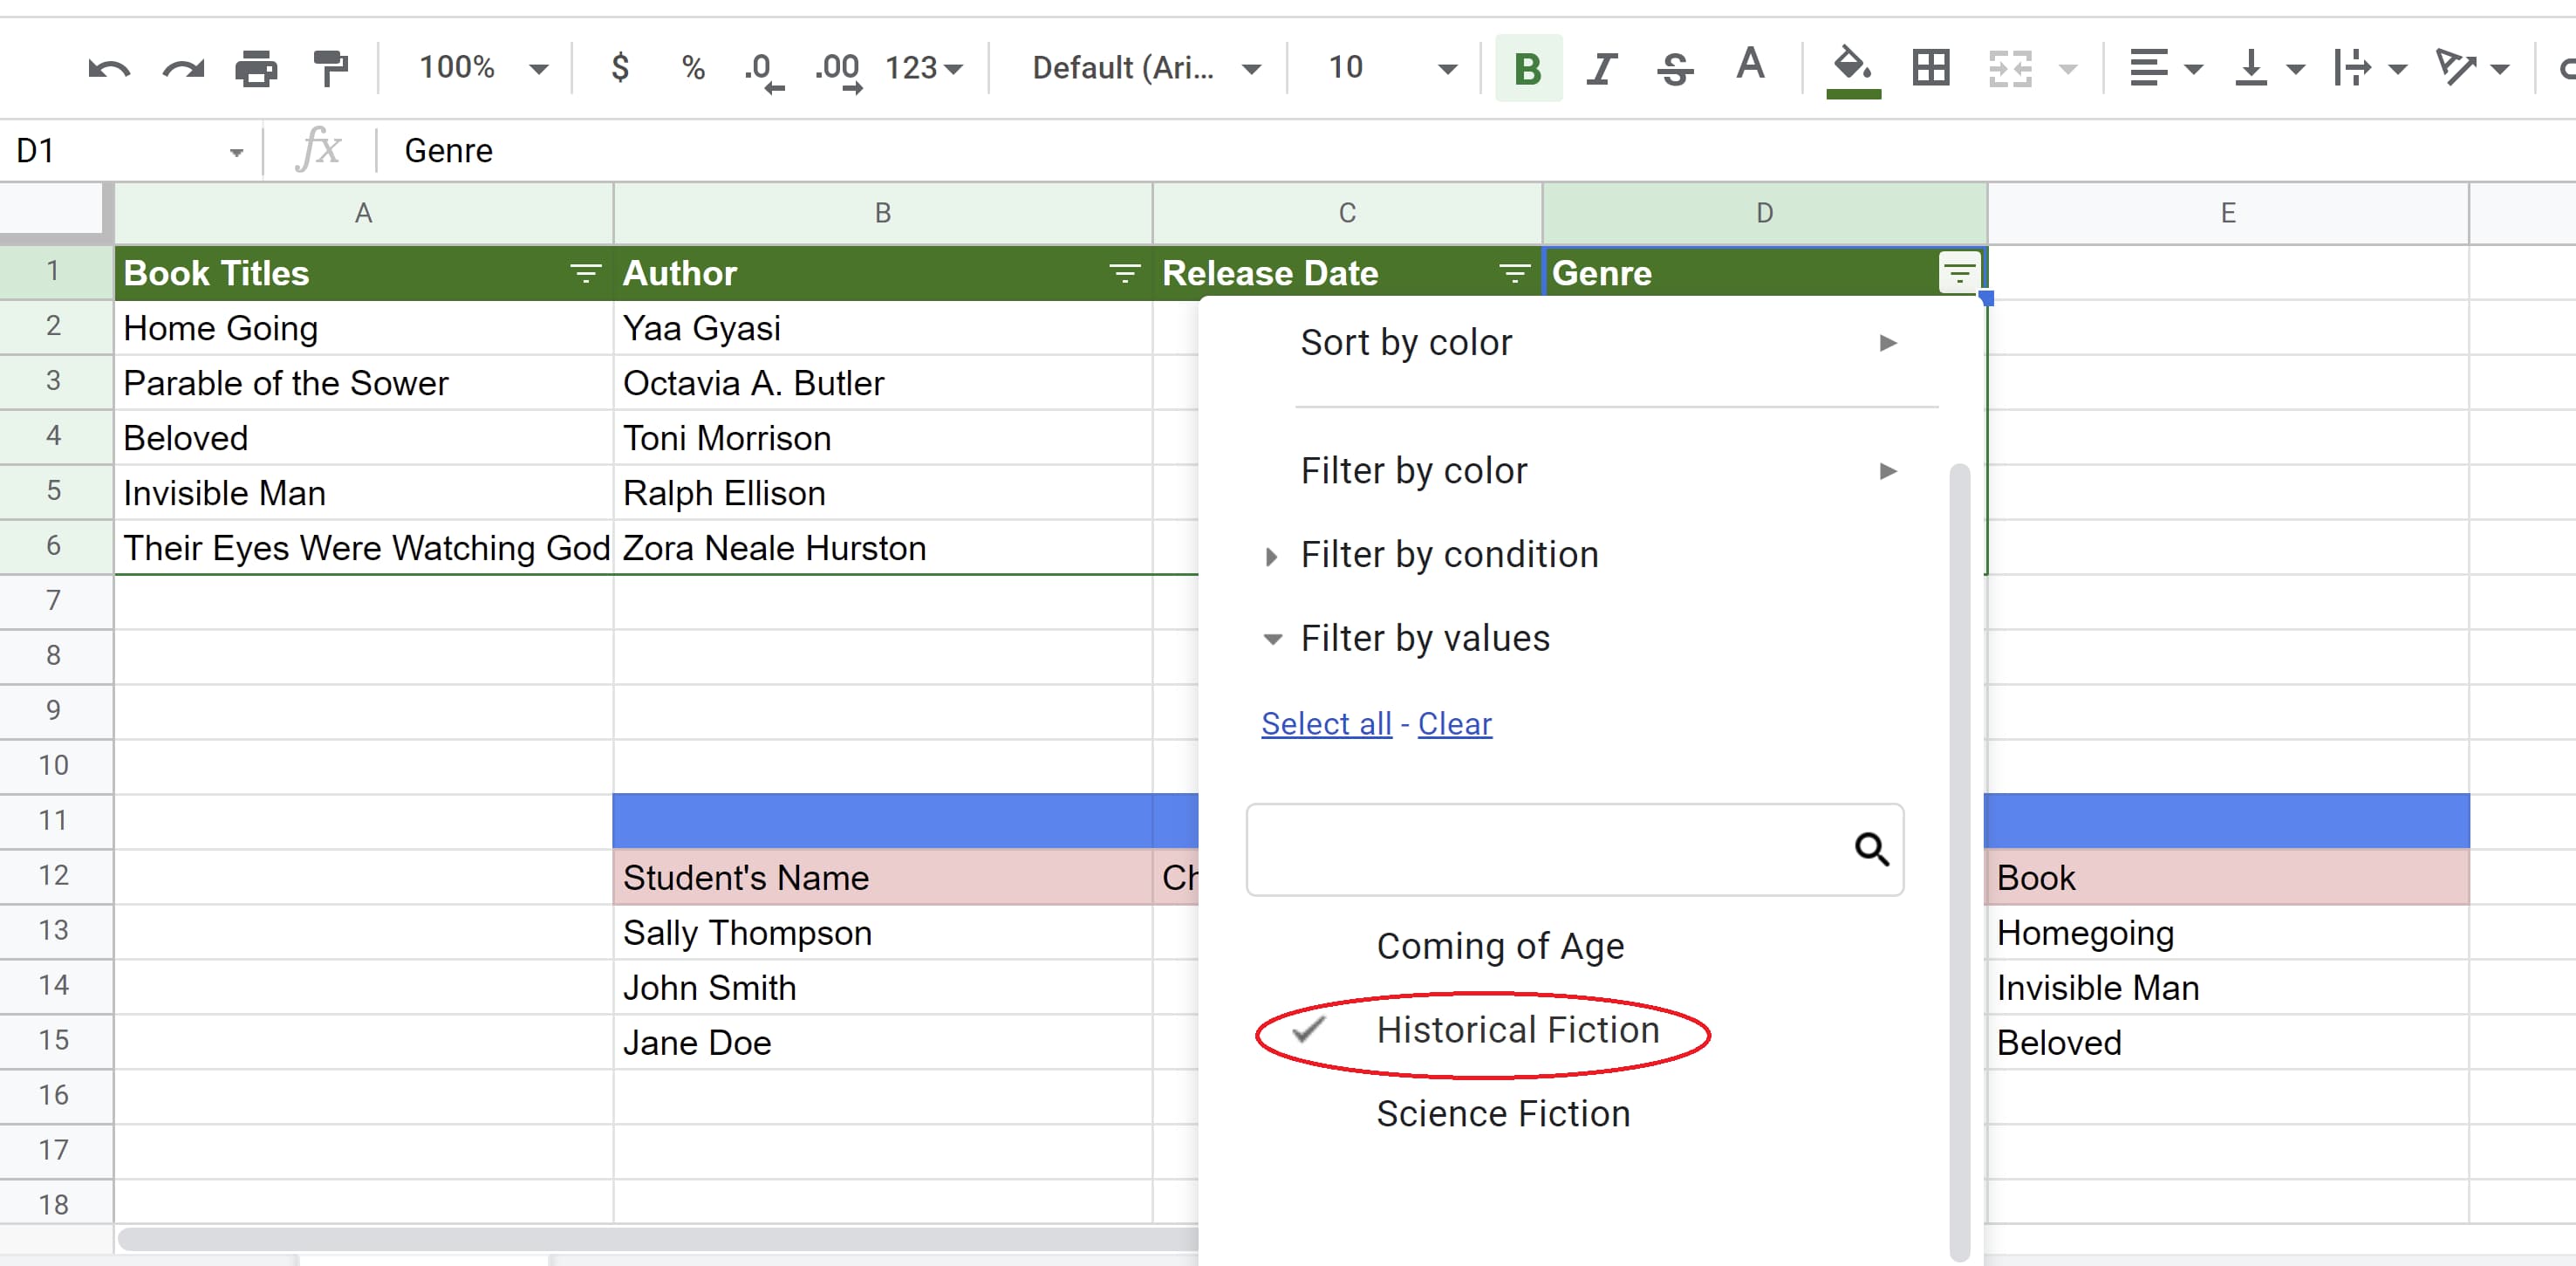 Historical fiction data value selected, other values ​​deselected in Google Sheets